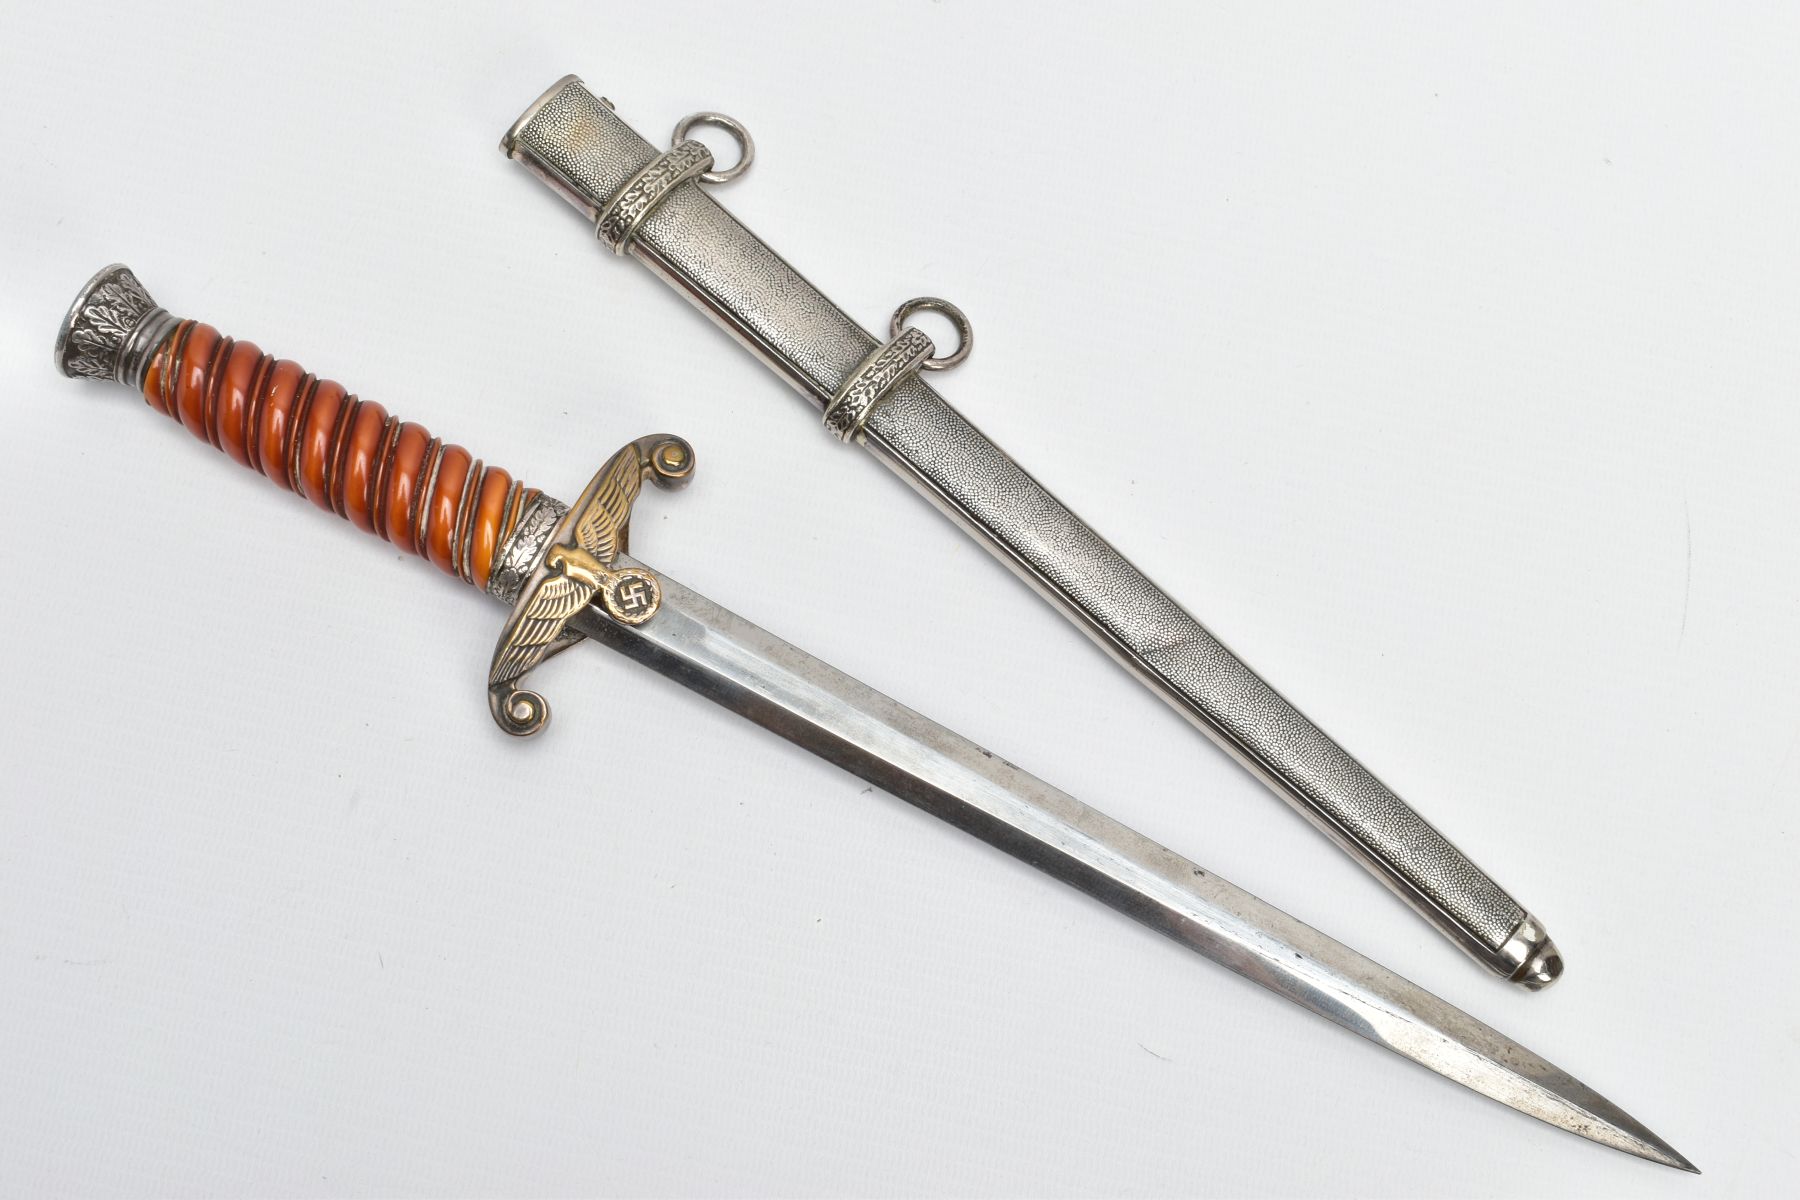 GERMAN 3RD REICH ARMY HEER DRESS DAGGER, WWII period by Carl Eickhorn, Solingen, with etched maker